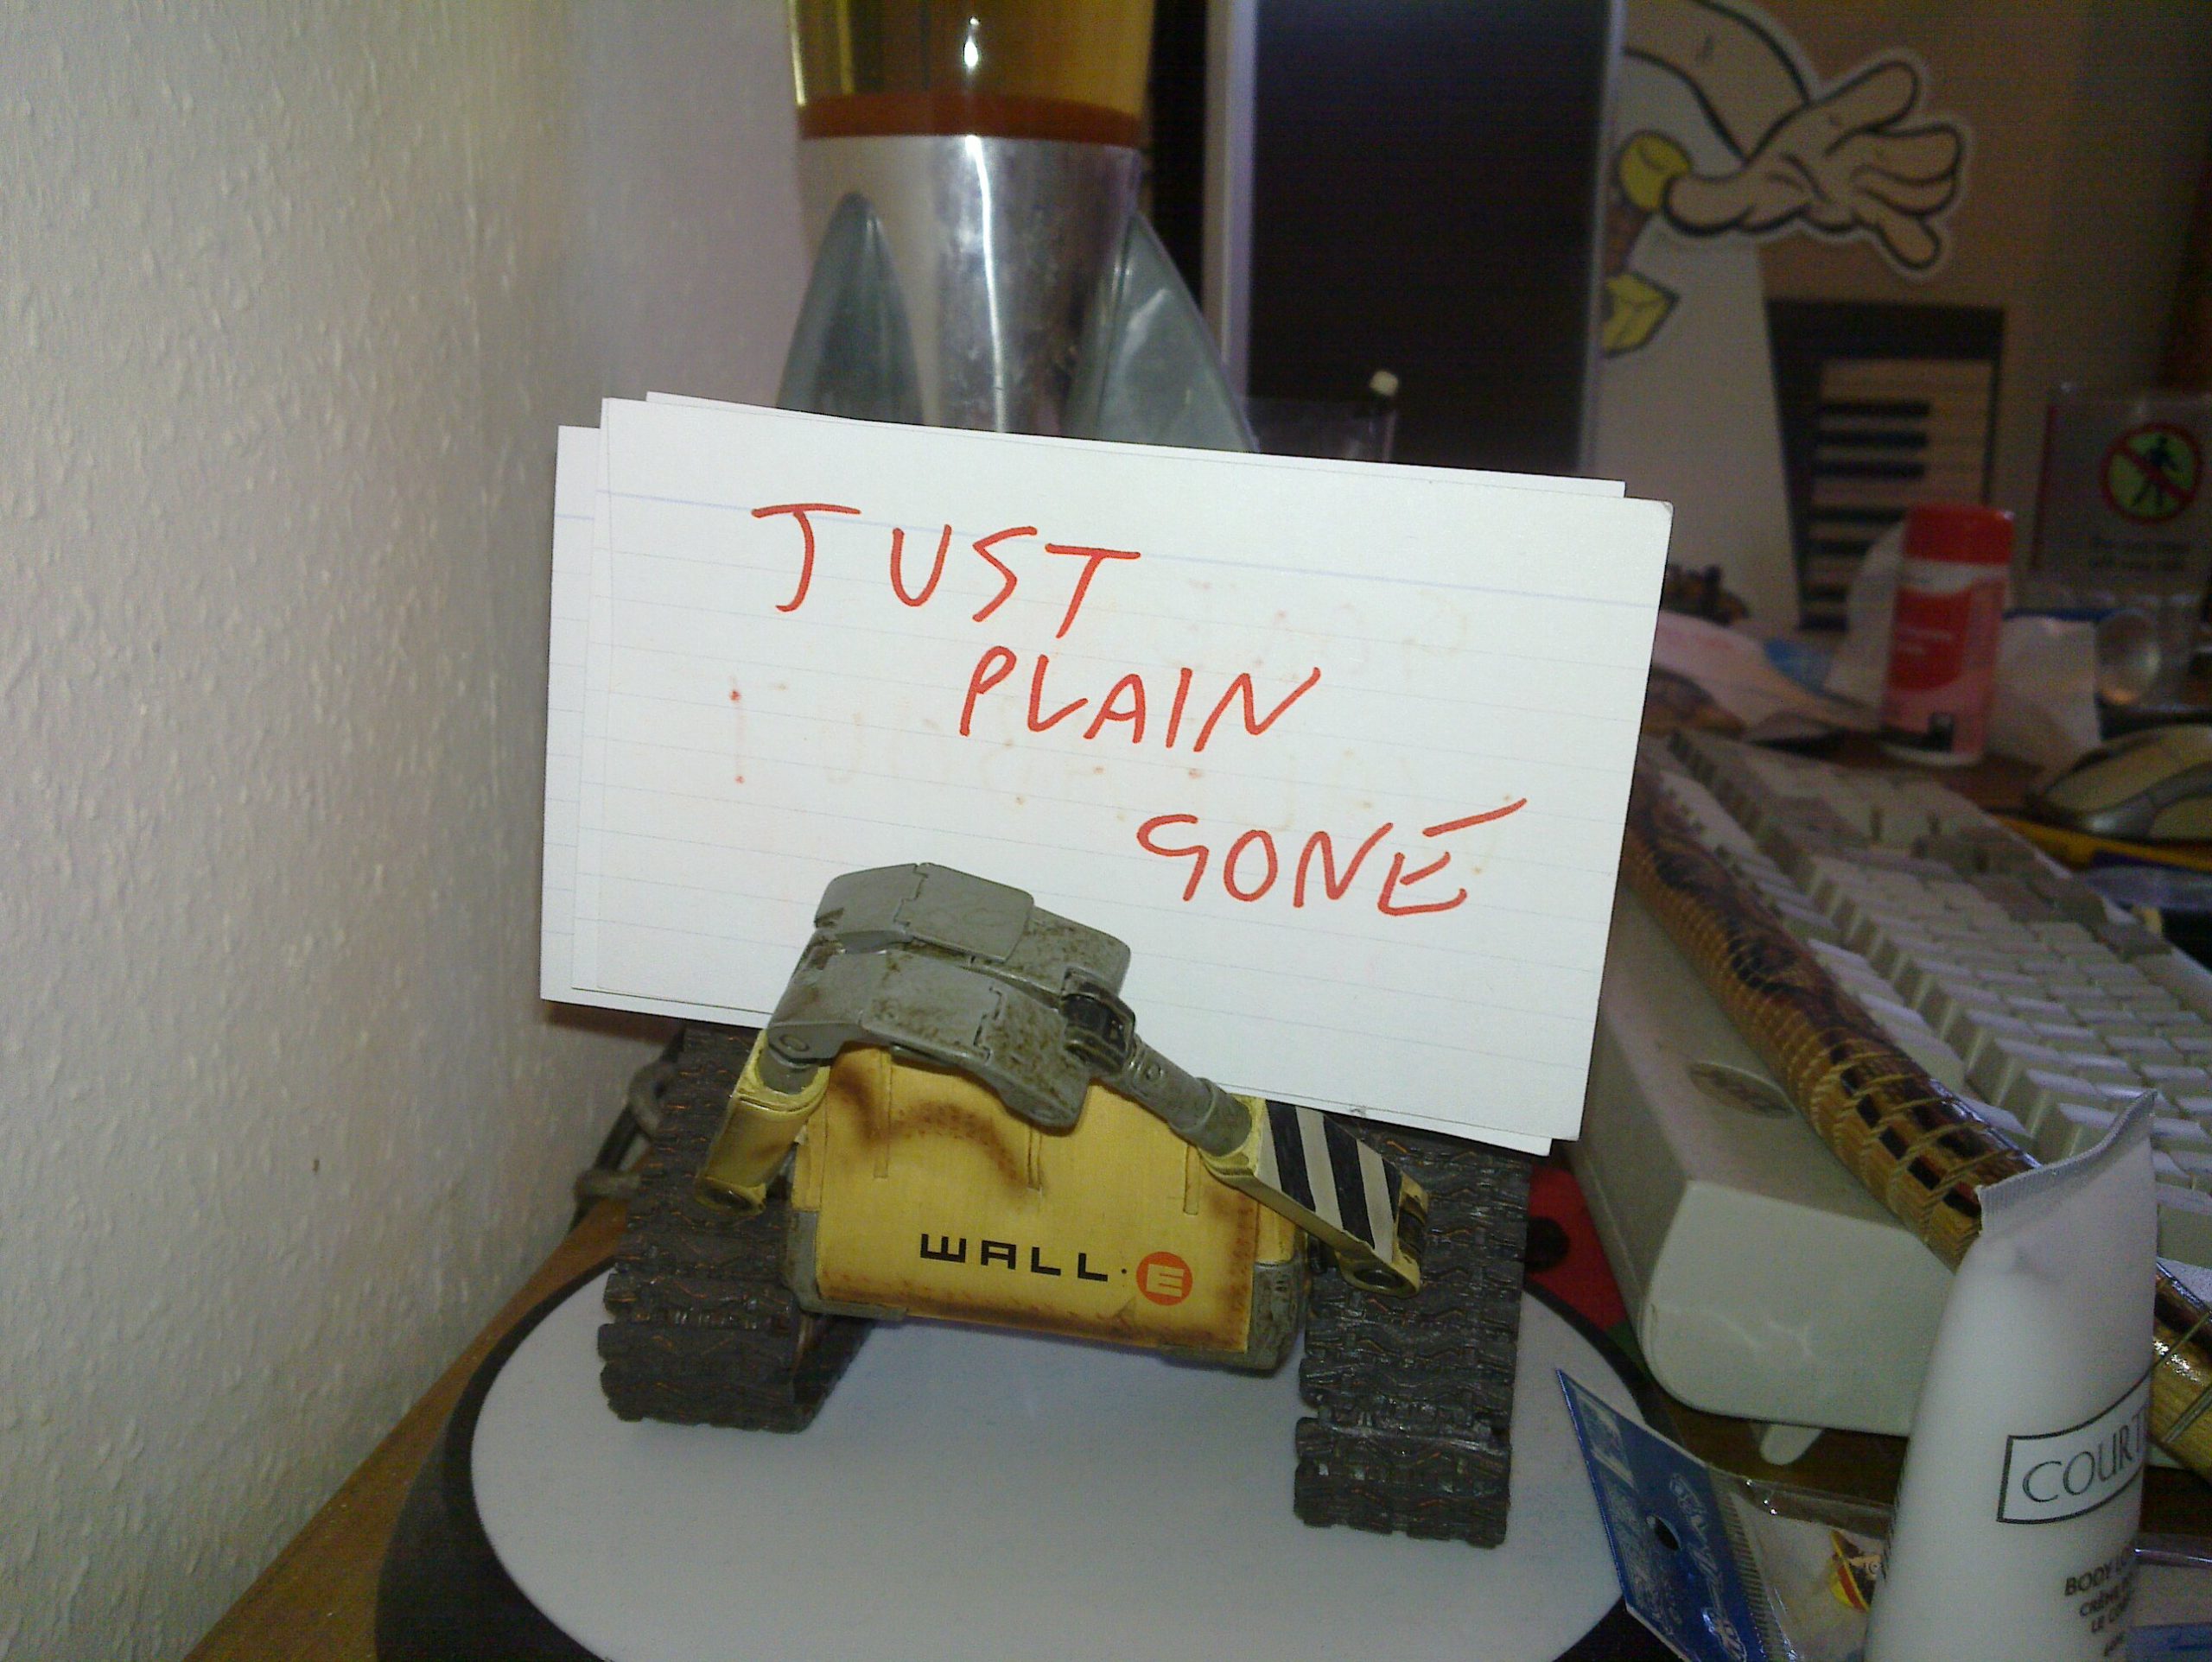 WALL-E holding a "just plain gone" sign.